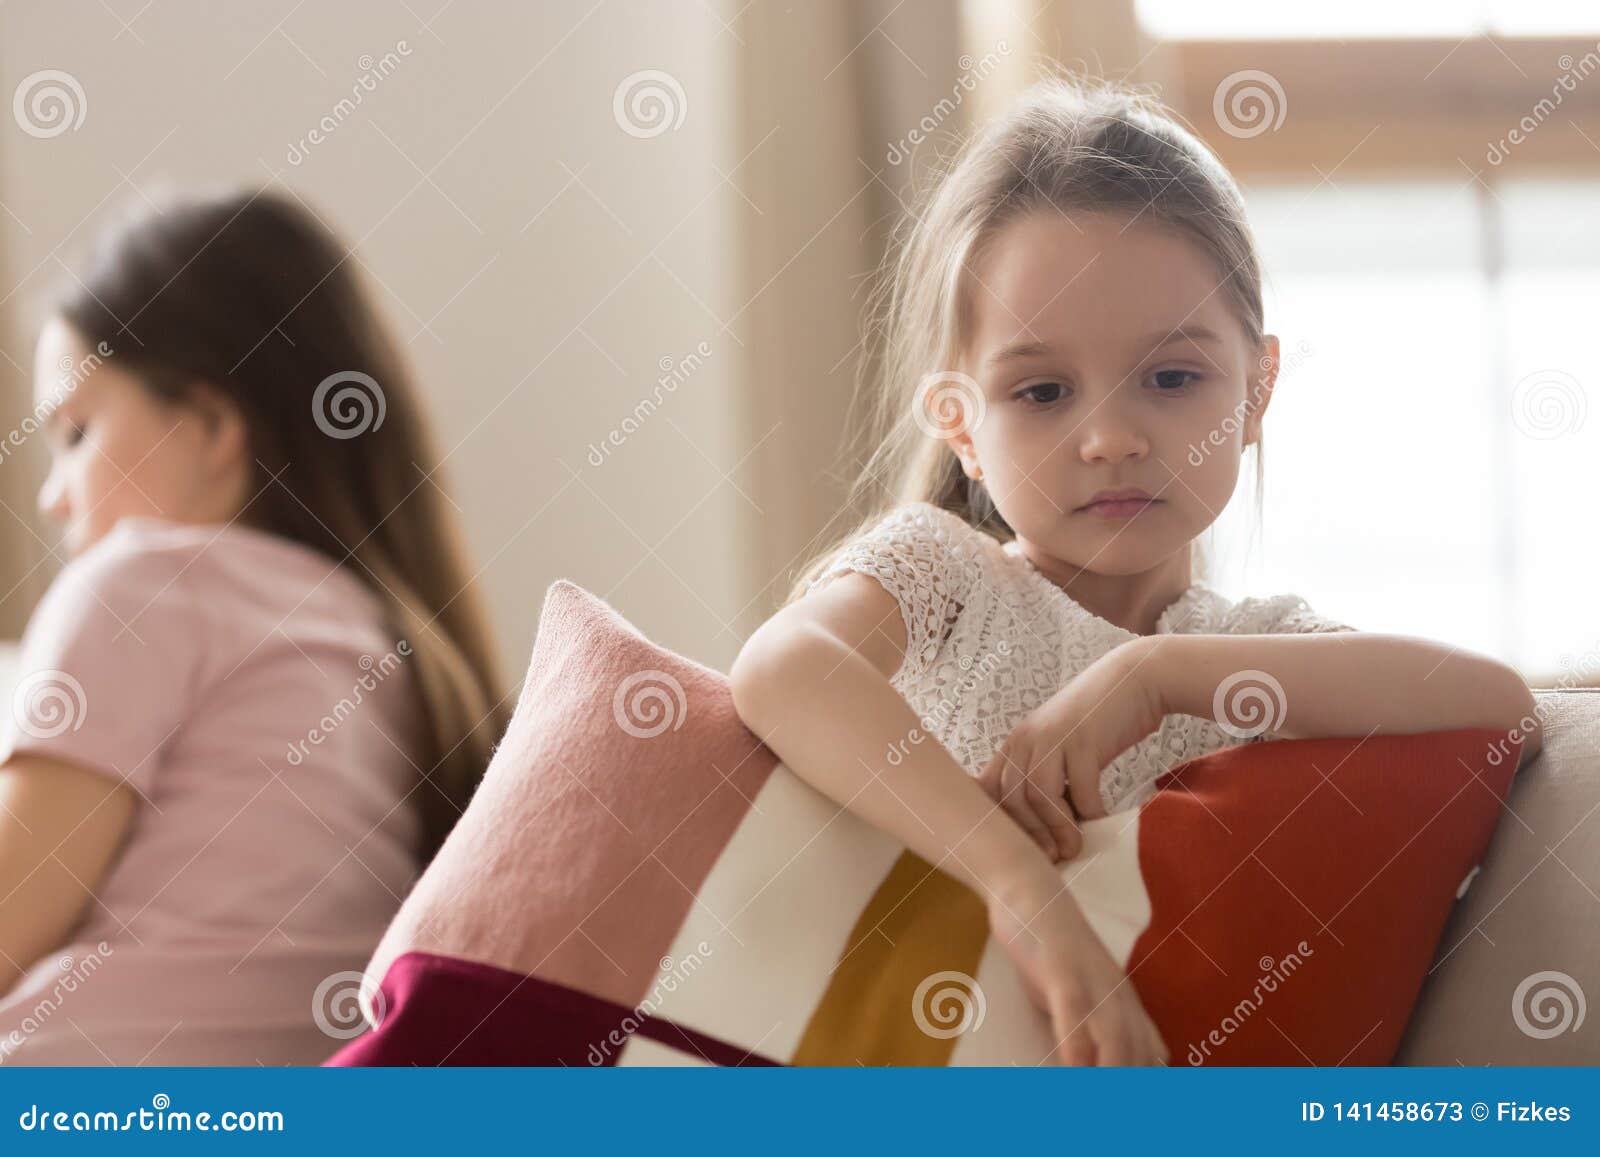 Upset Kid Daughter Feeling Sad after Fight with Mother Stock Image ...